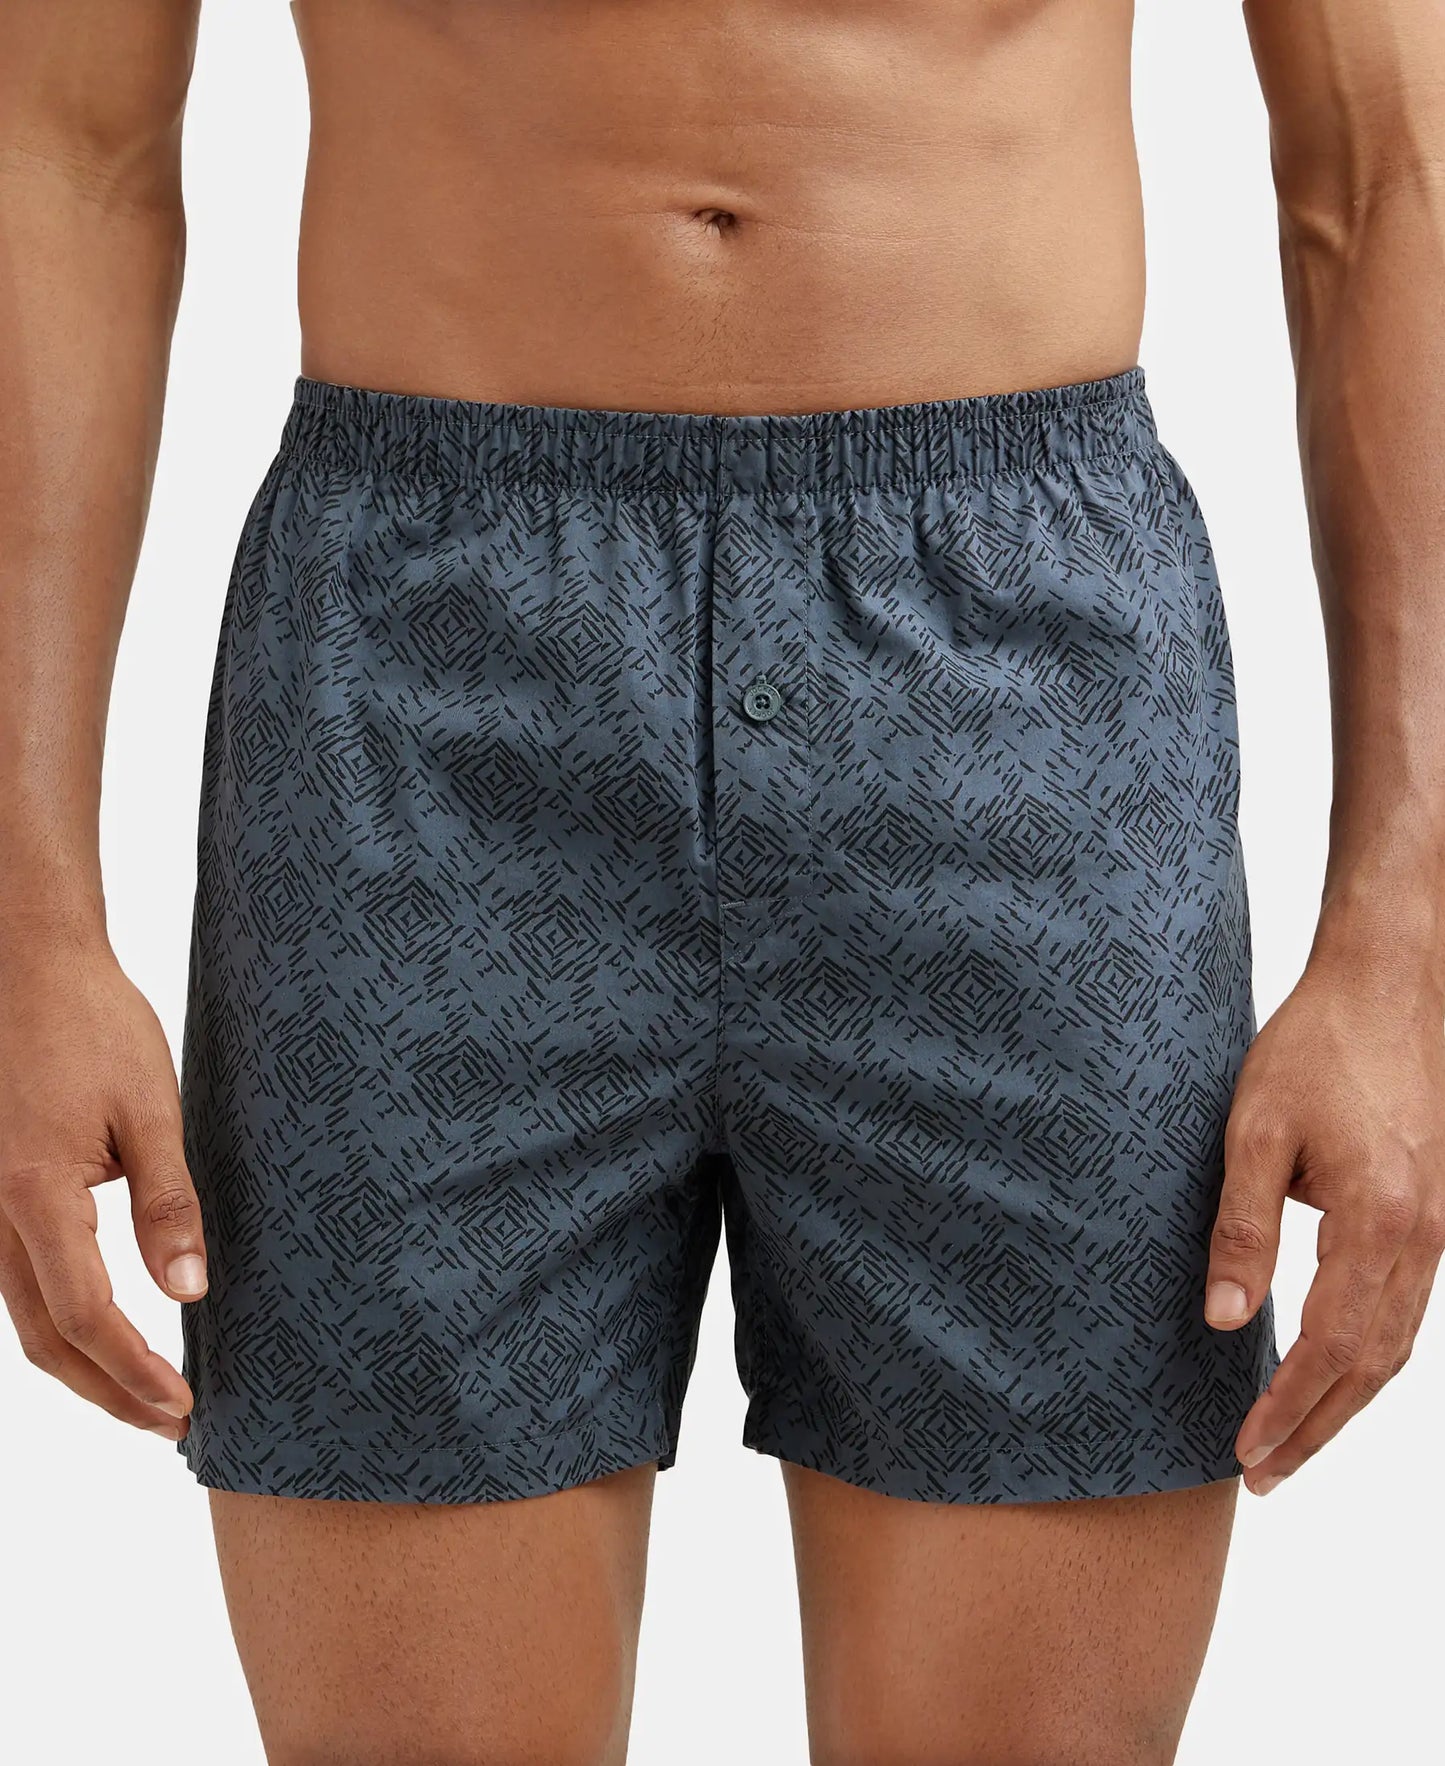 Super Combed Mercerized Cotton Woven Checkered Inner Boxers with Ultrasoft and Durable Inner Waistband - Black & Navy 3-3